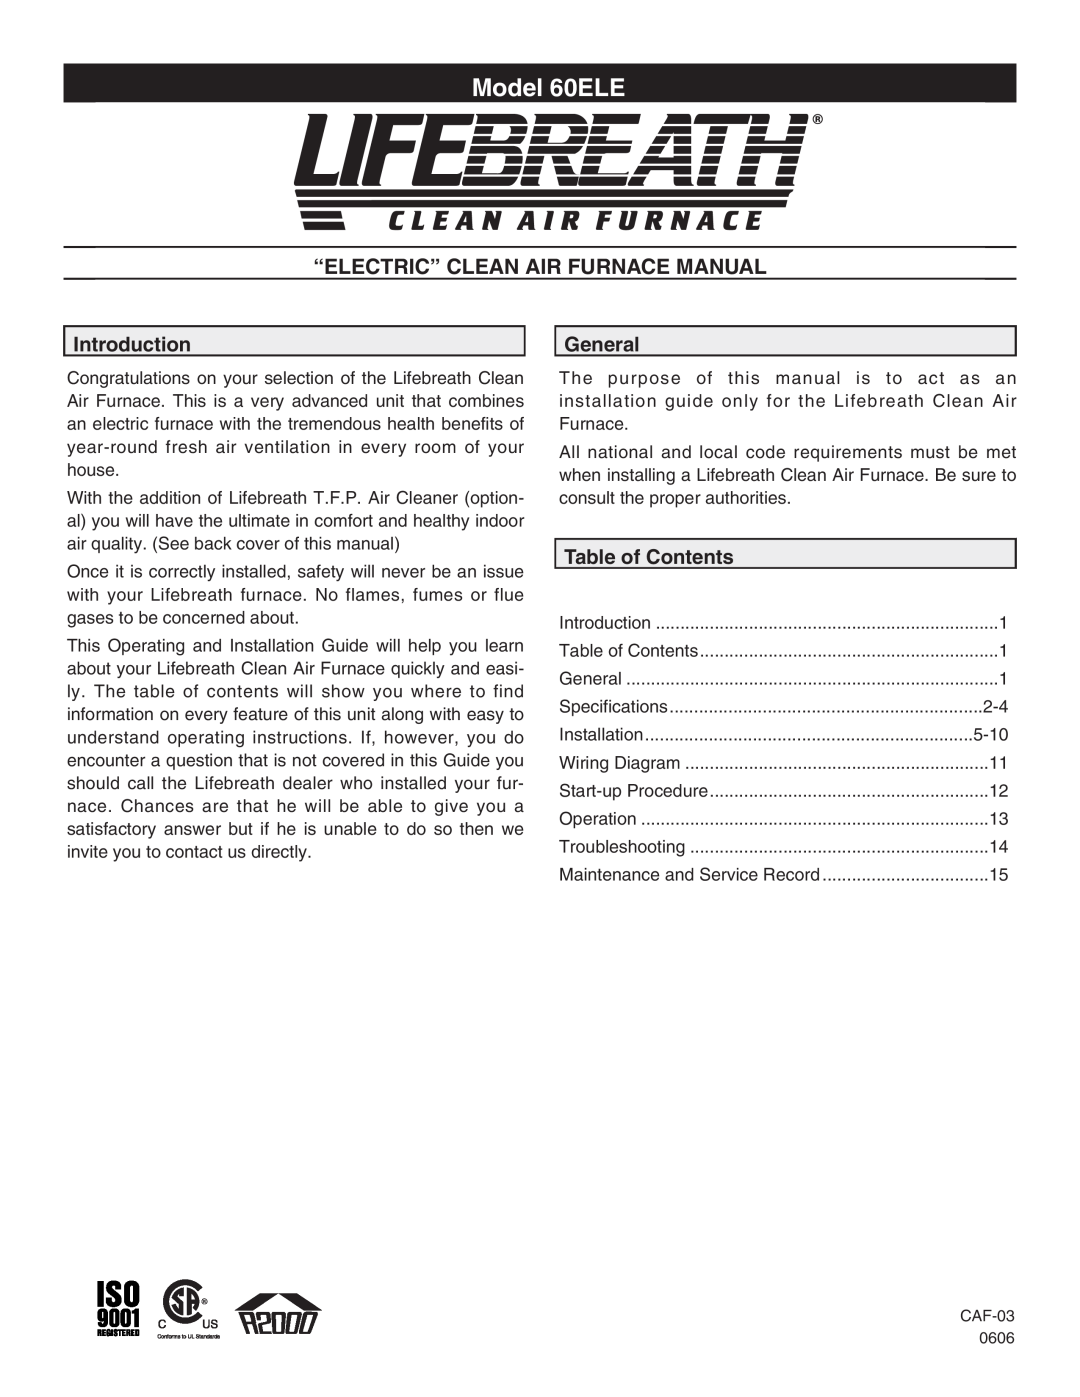 Lifebreath 60ELE operating instructions “Electric” Clean Air Furnace Manual, Introduction, General, Table of Contents 